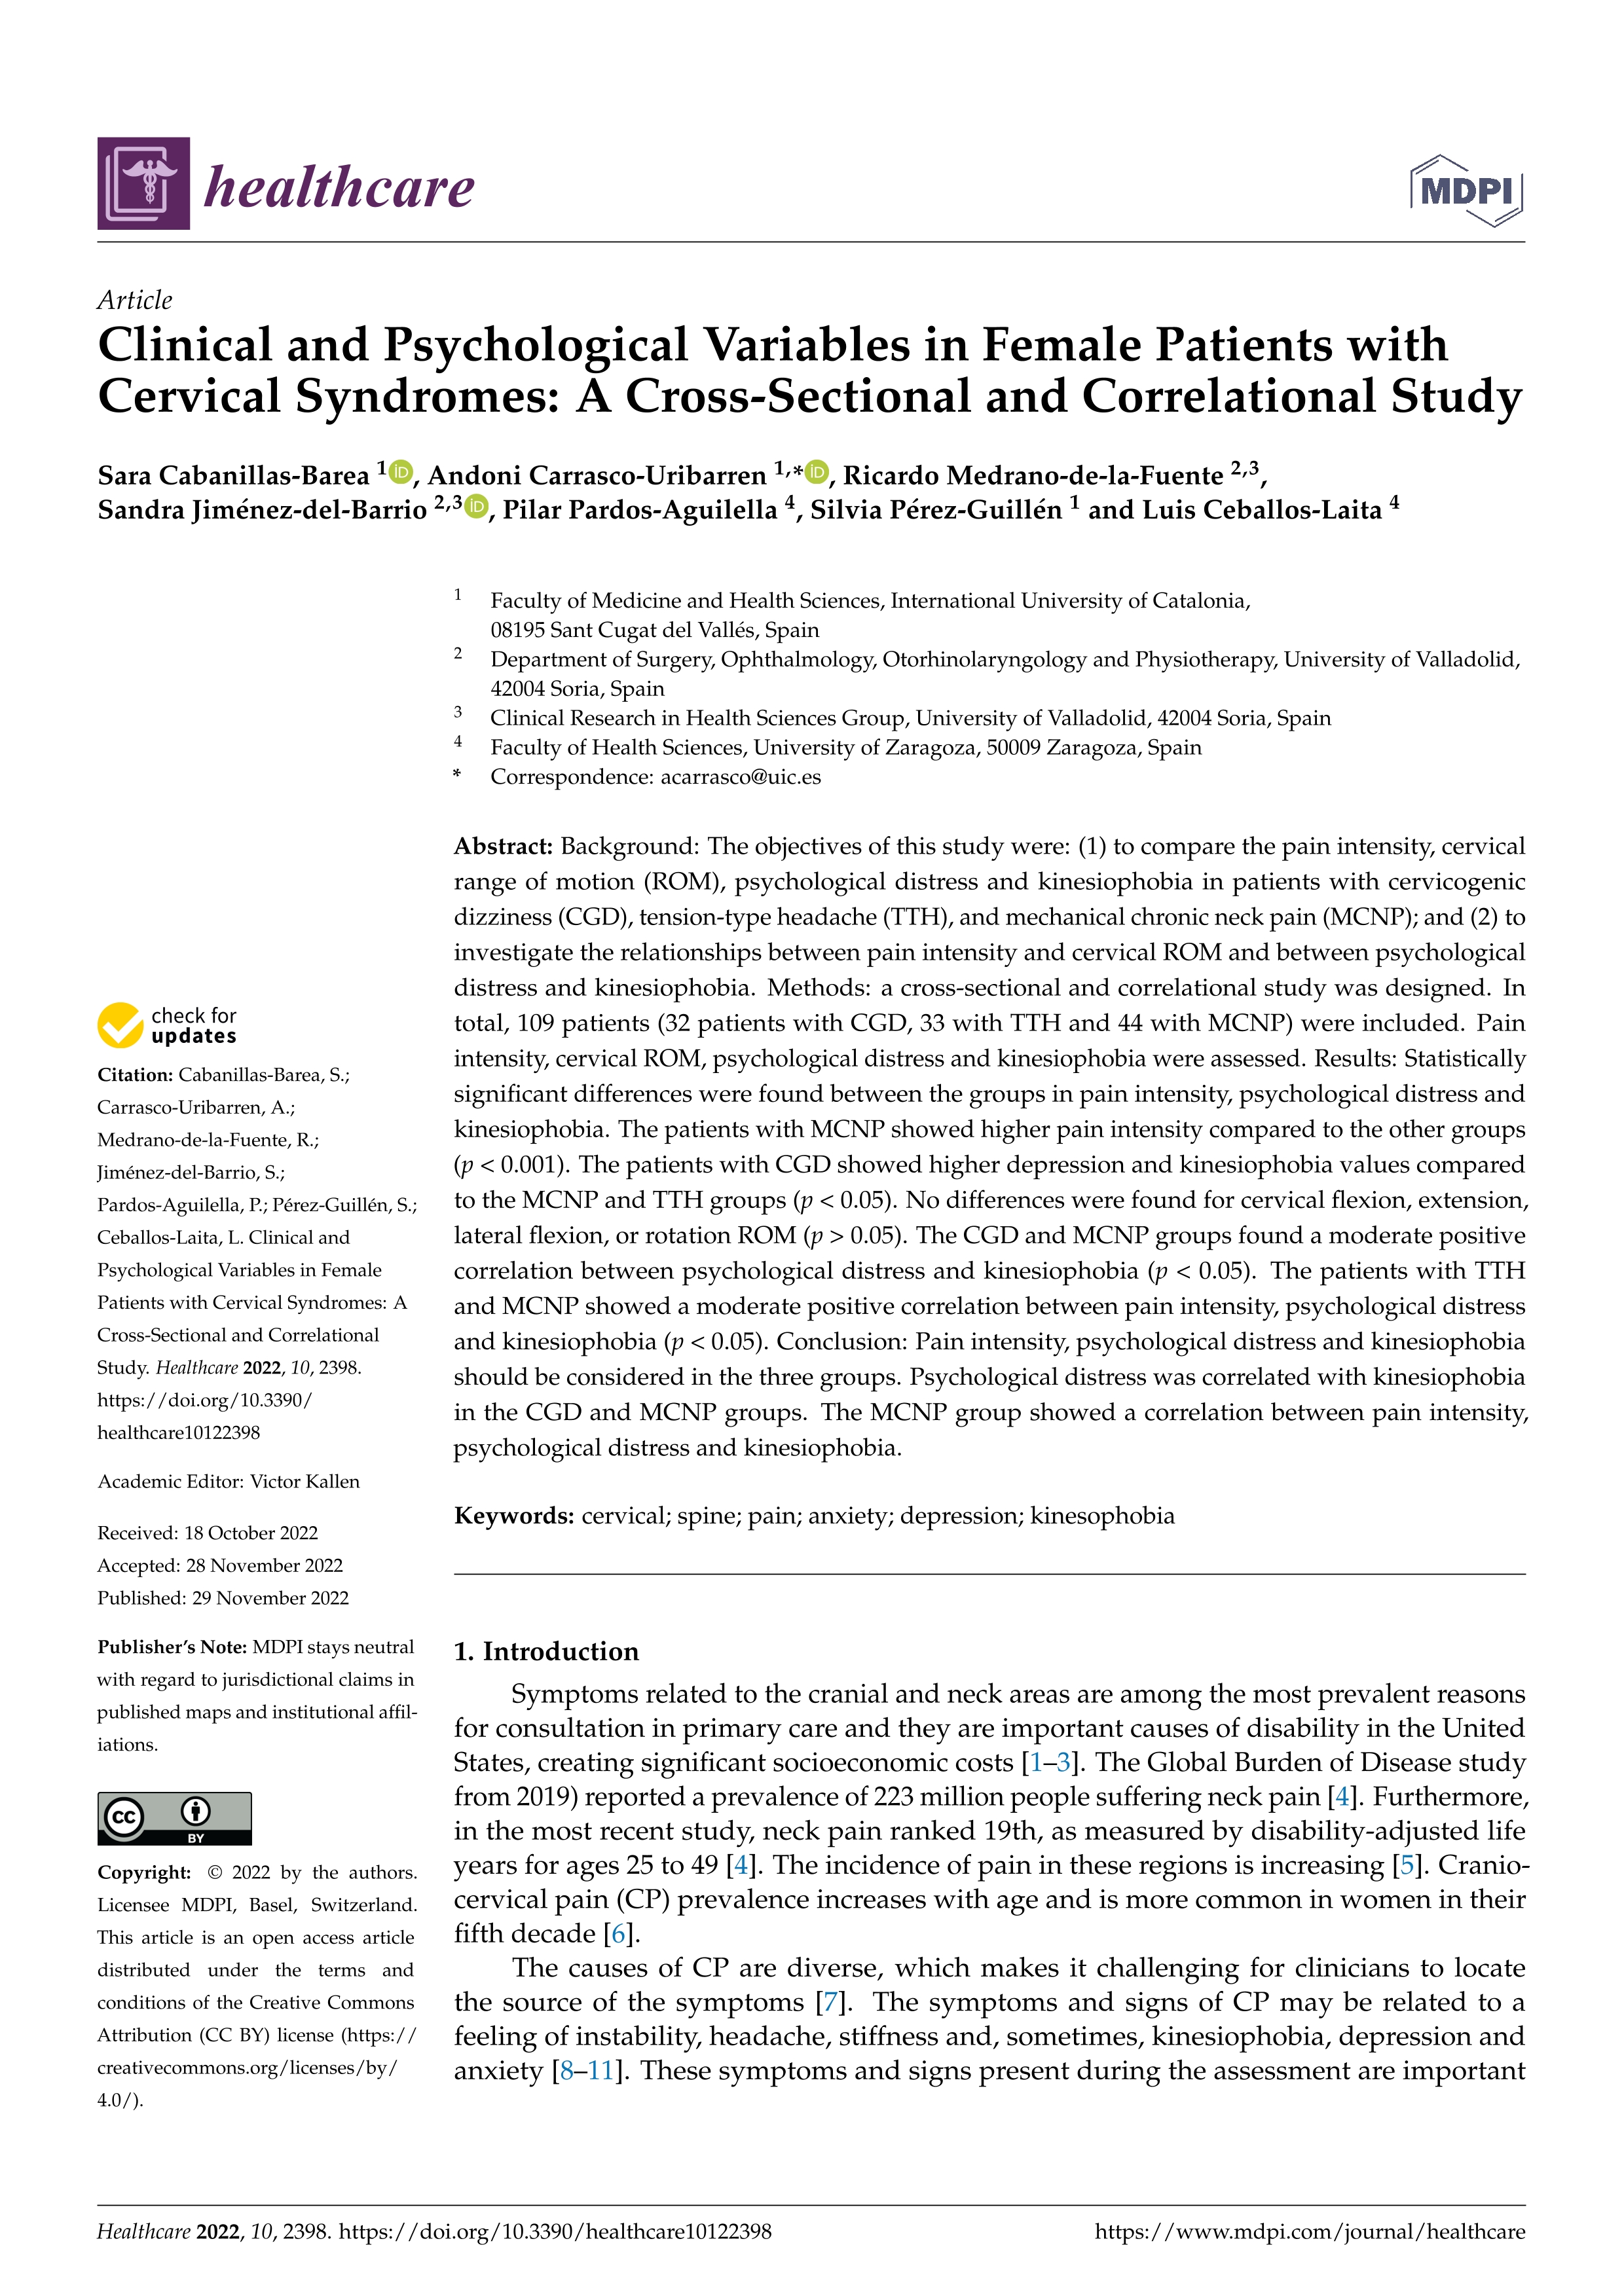 Clinical and Psychological Variables in Female Patients with Cervical Syndromes: A Cross-Sectional and Correlational Study